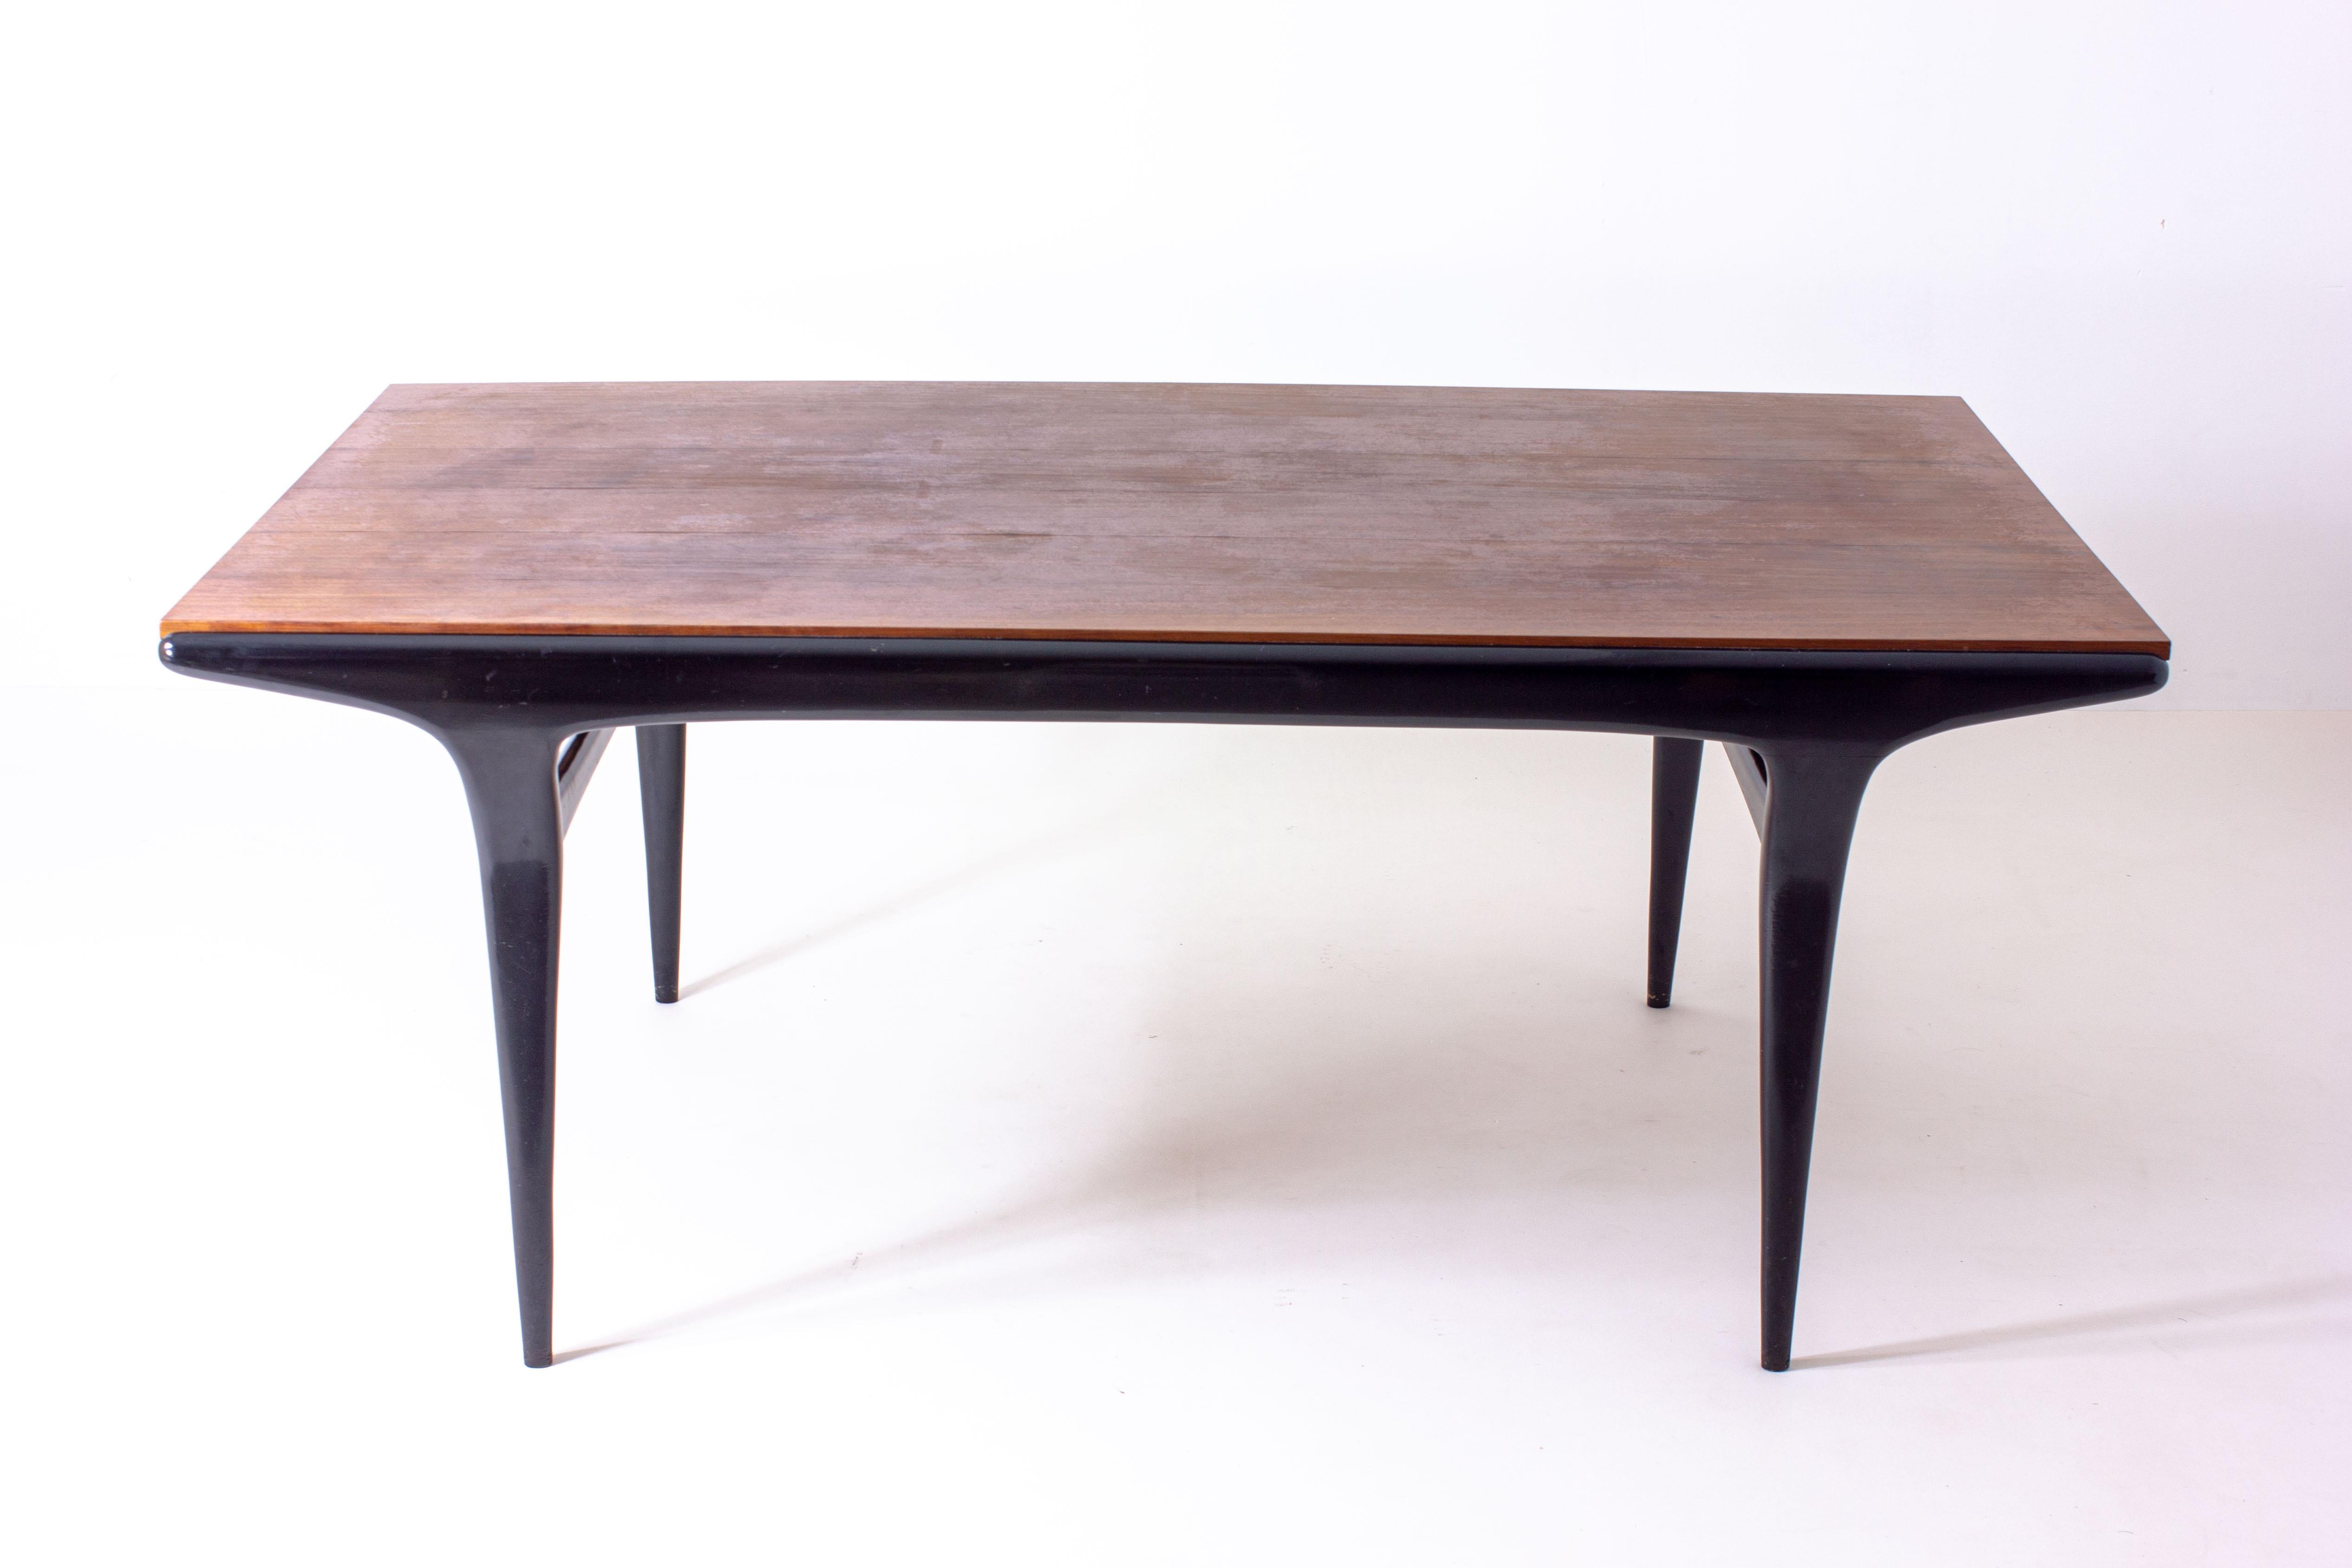 This table is truly one of a kind. Not only is this Alfred Hendrickx’ most high end piece, it also the most sought after. The stark table top contrasts beautifully with the organic and refined table legs. This table is hard to find in any condition,